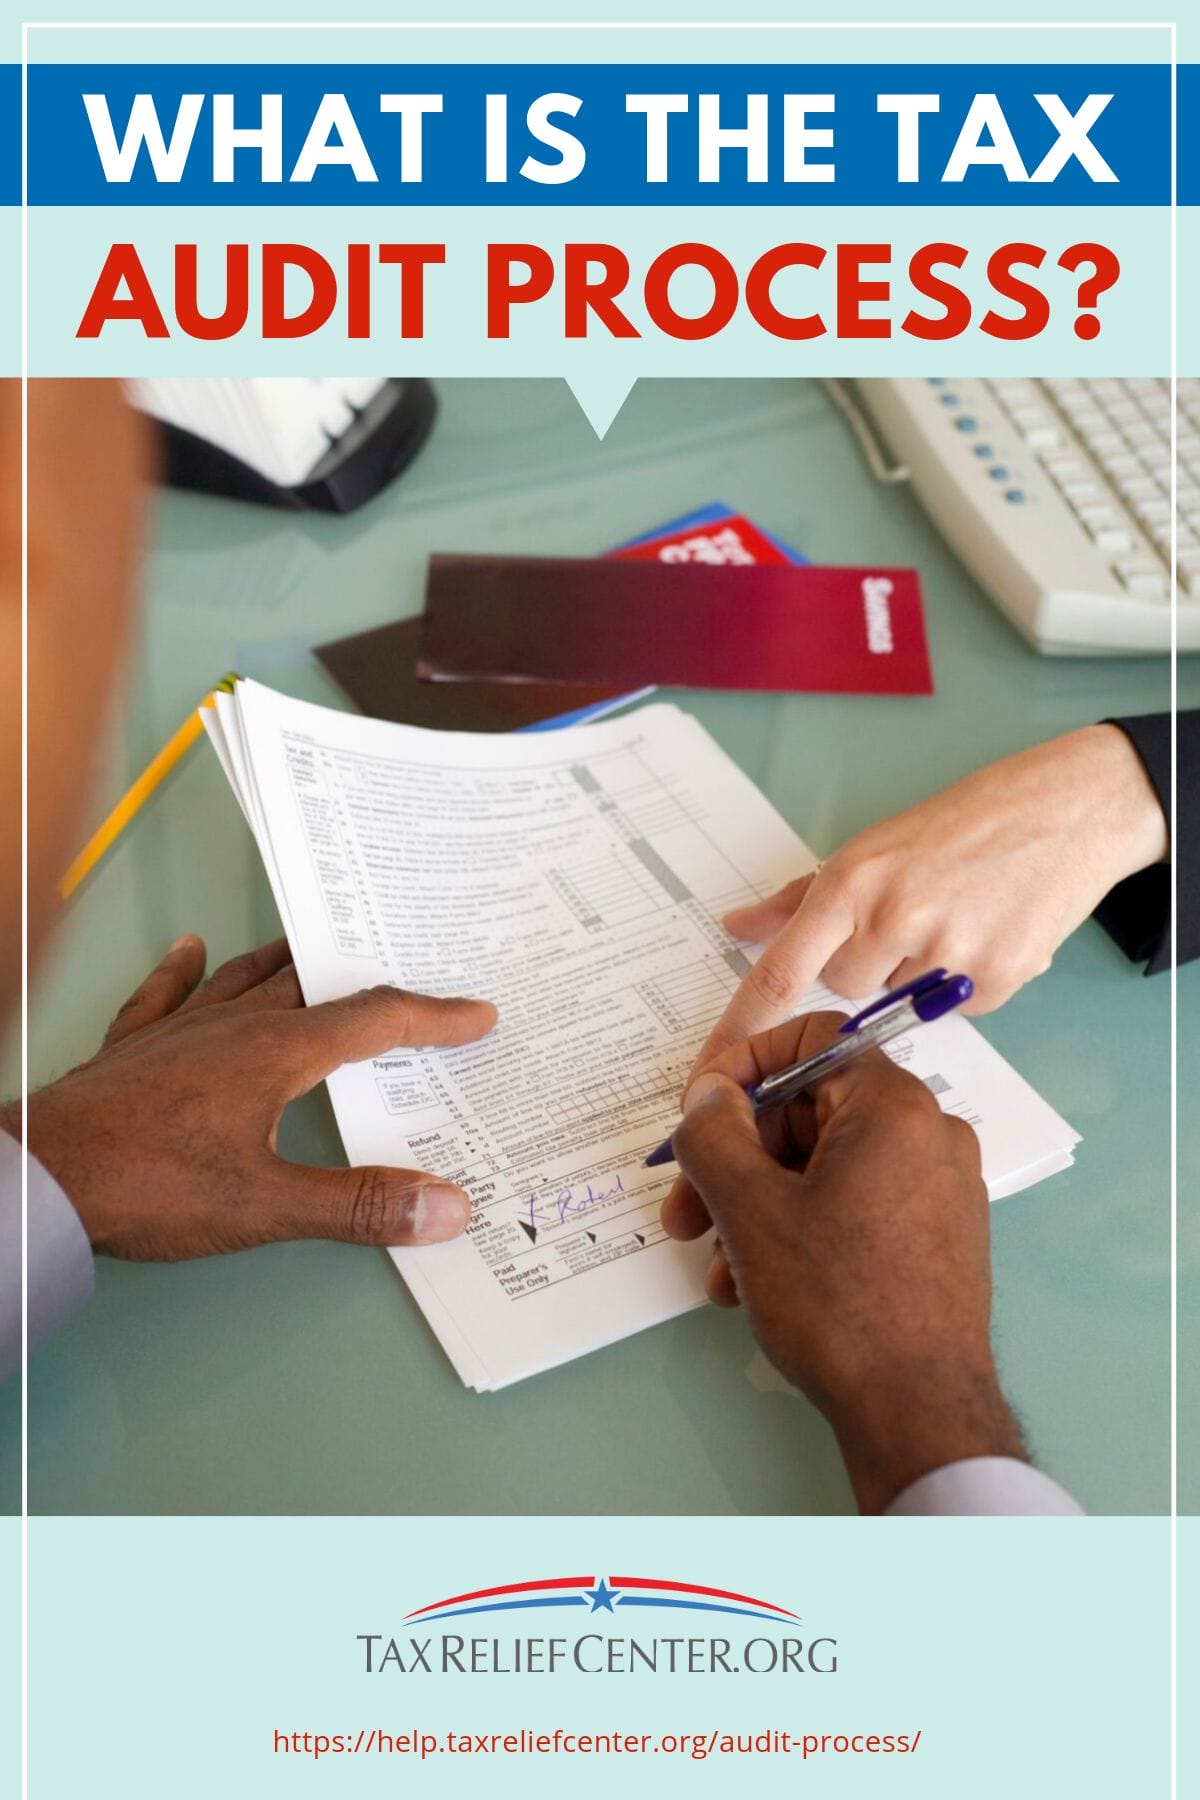 What Is The IRS Tax Audit Process? https://help.taxreliefcenter.org/audit-process/